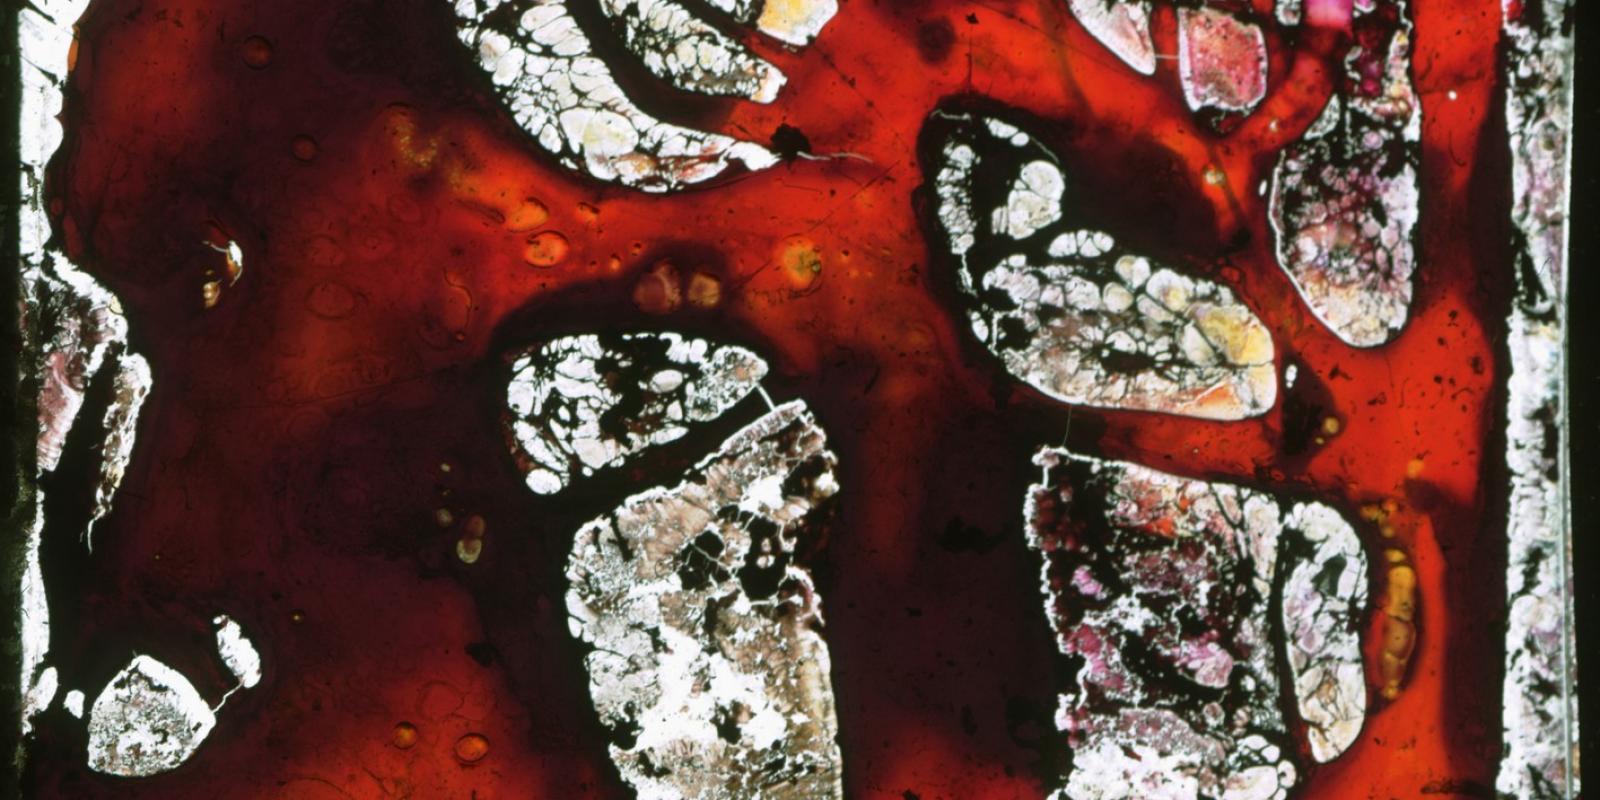 detail of a glass slide stained with red color. It looks like something melting.